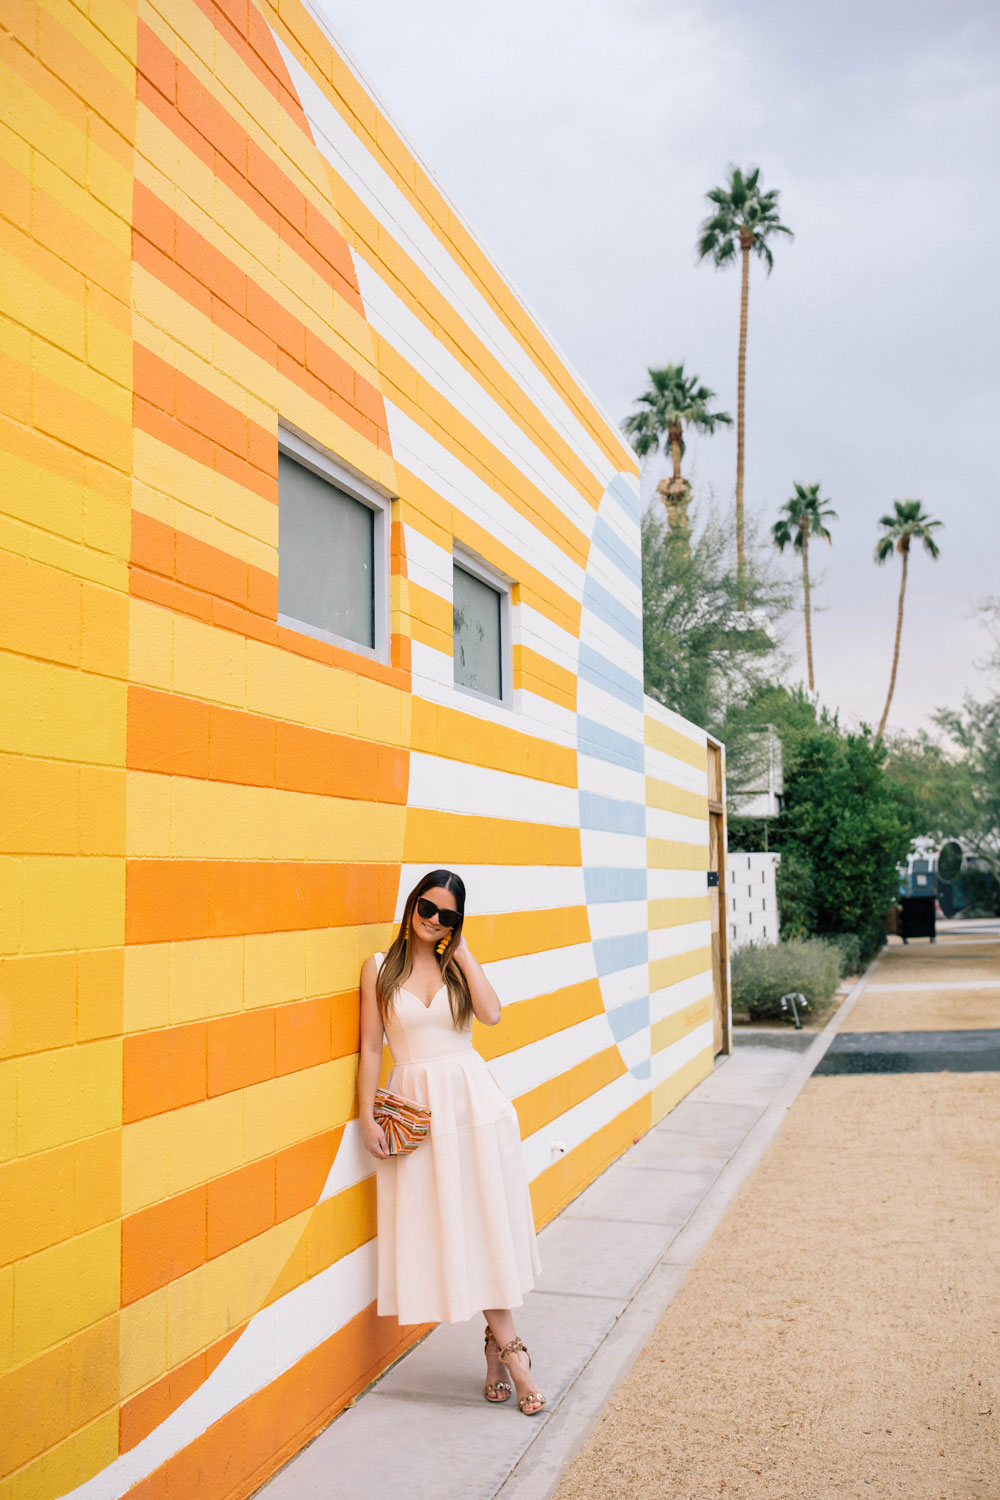 Most Instagrammable Spots Palm Springs